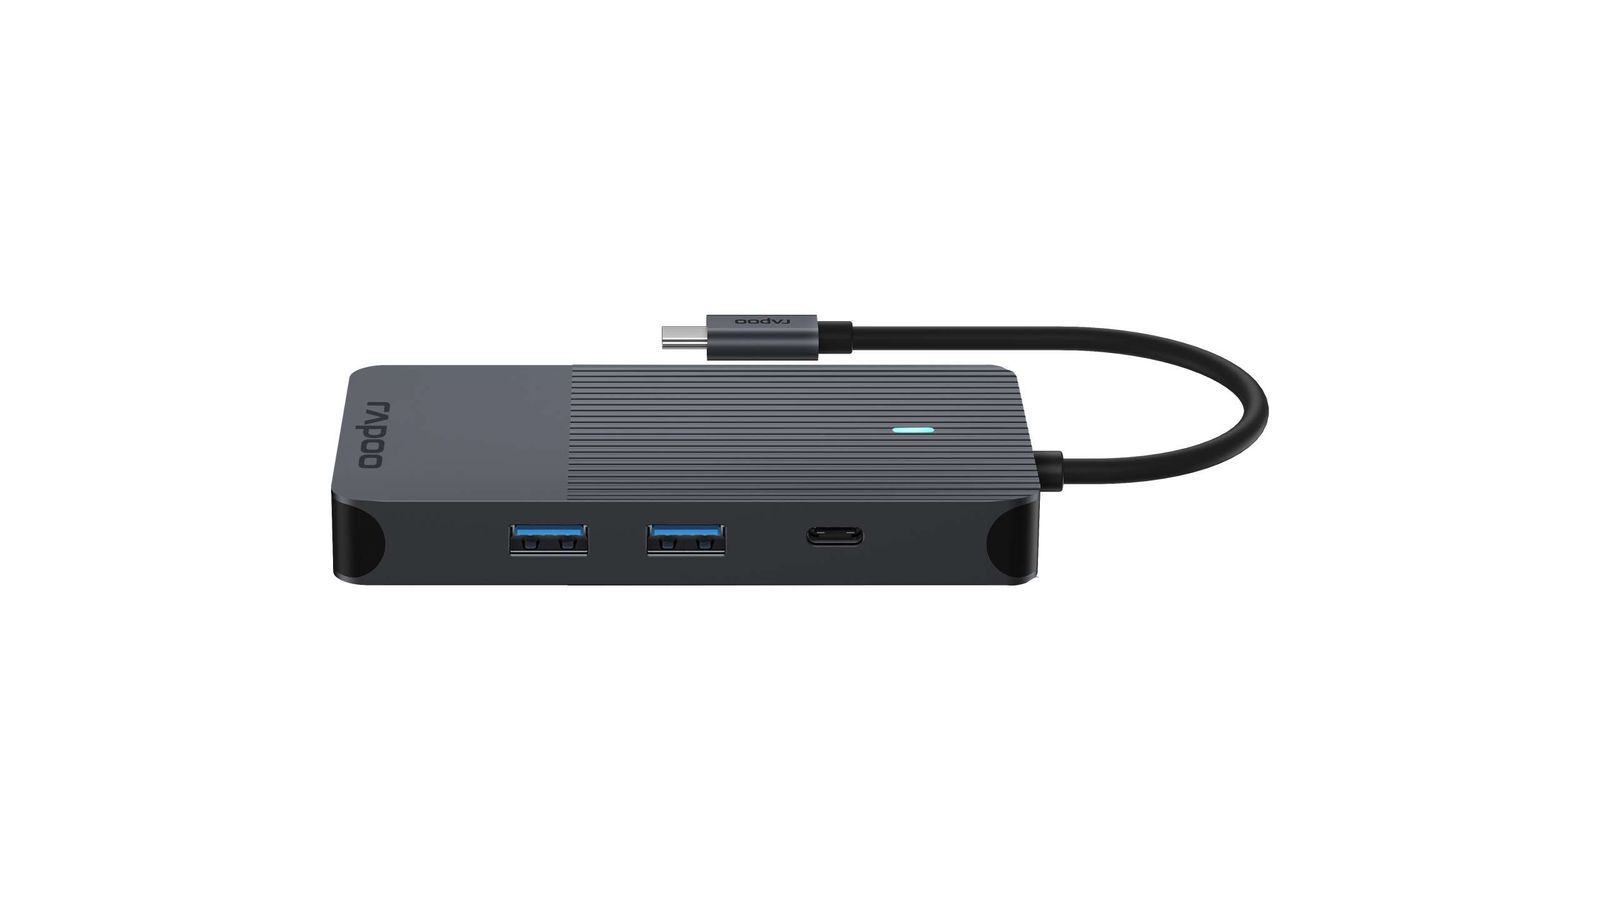 Rapoo UCM-2005 10-in-1 USB-C Multiport Adapter 100W Power Delivery HDMI DisplayPort LAN USB-C USB-A 3.0 microSD AUX v1.0